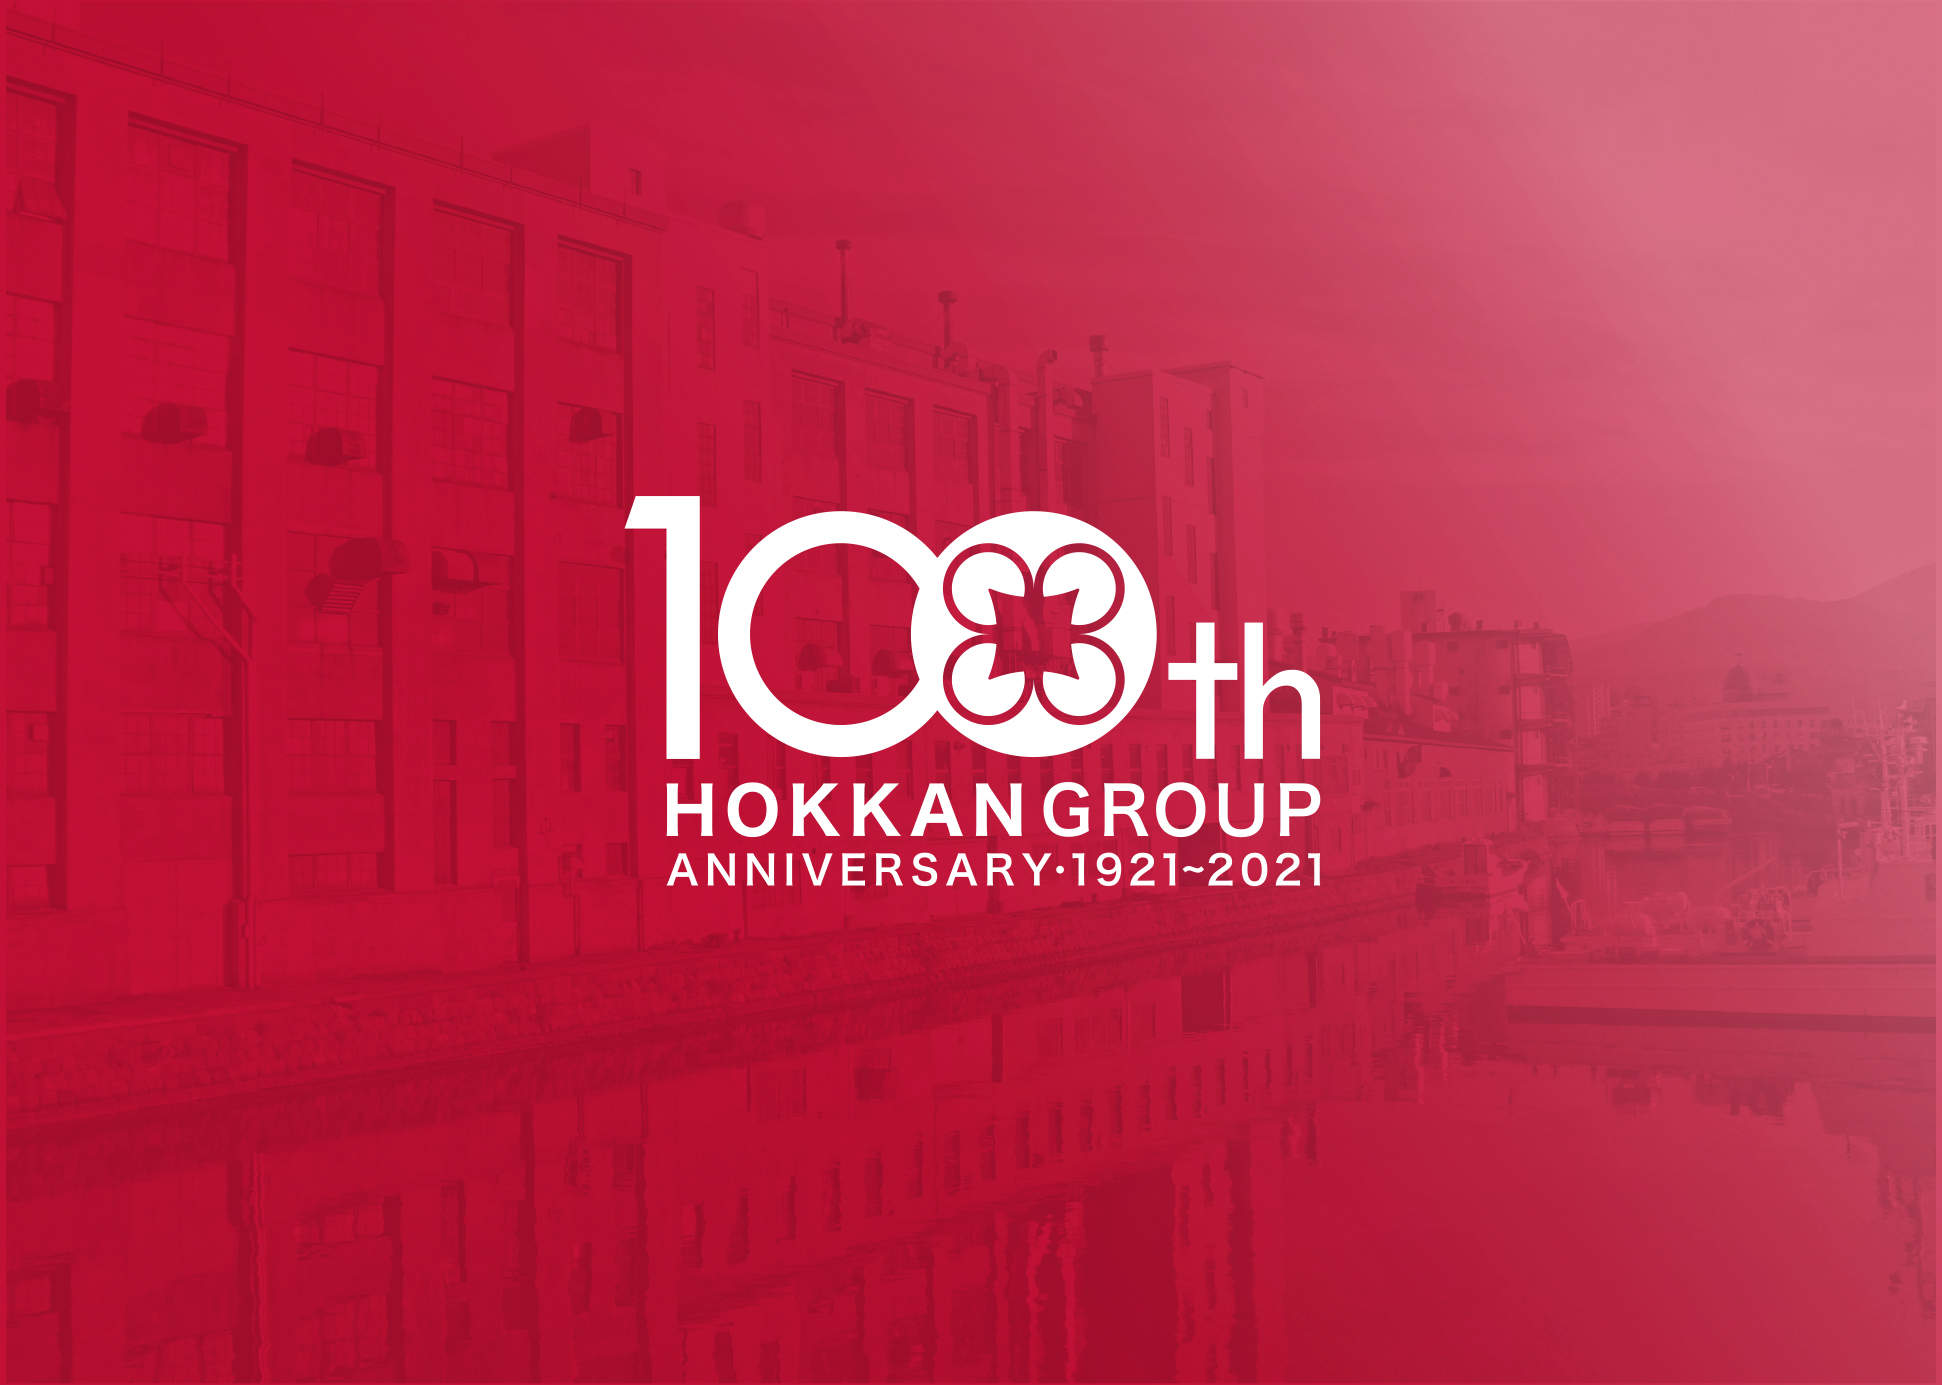 HOKKAN HOLDINGS has reached its 100th anniversary